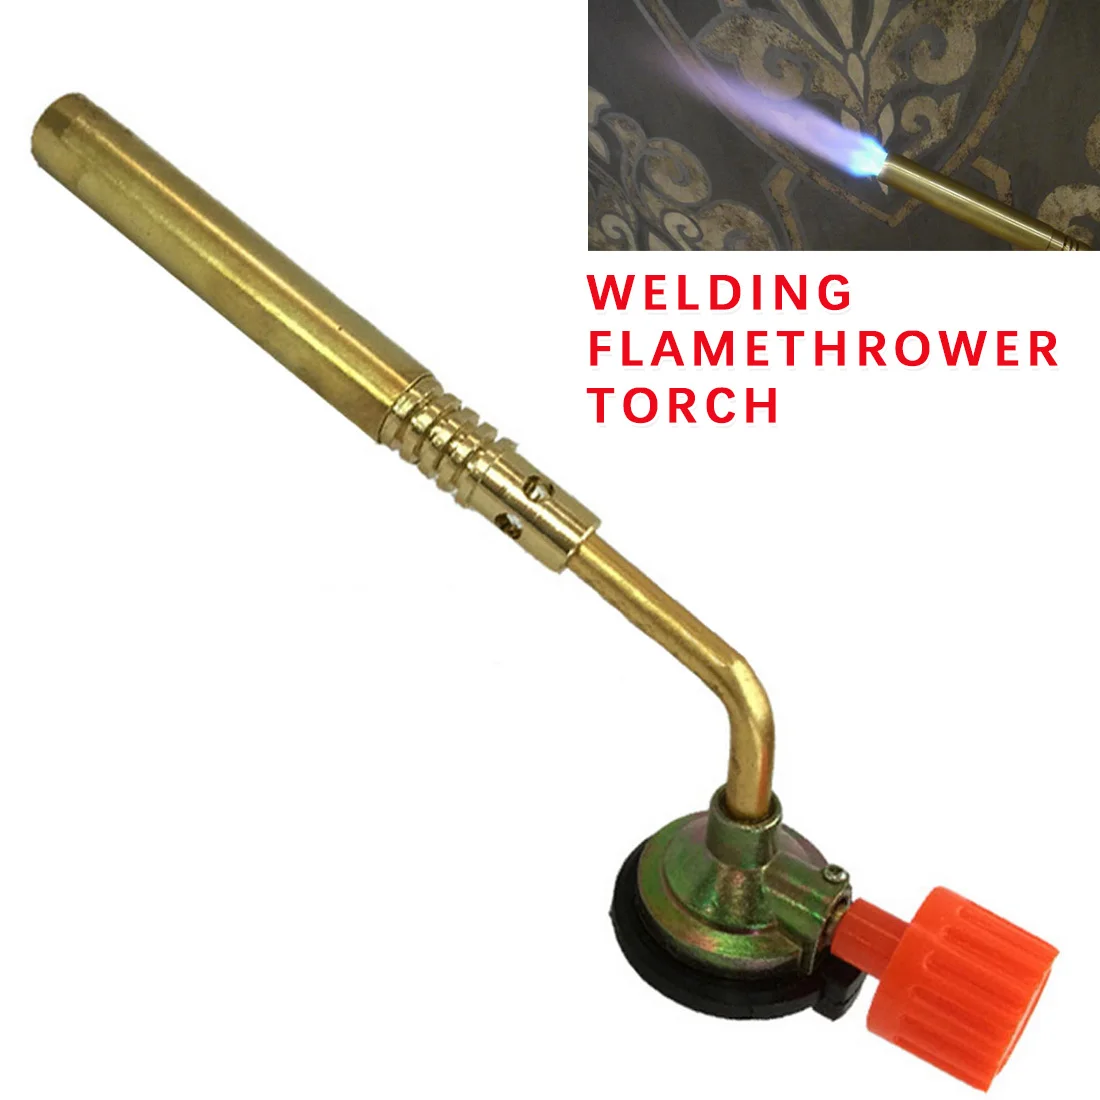 Flamethrower Burning Propane Gas Blow Torch Ignition Camping Welding BBQ Tool 